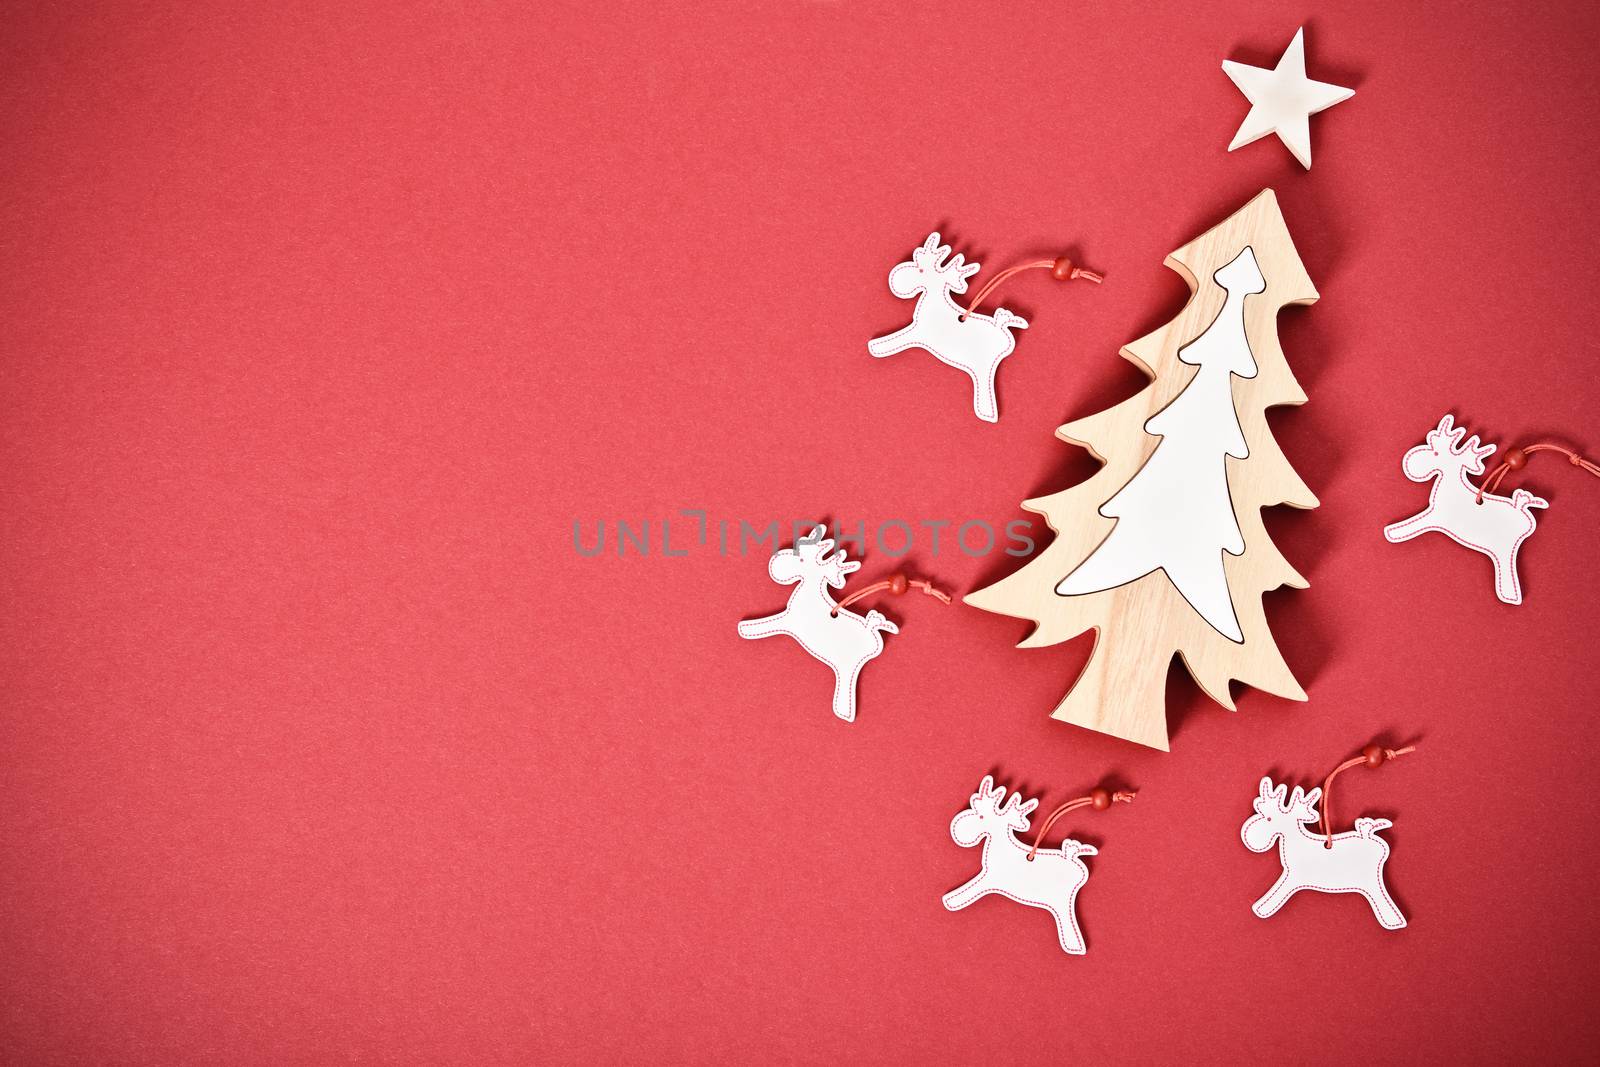 Seasonal greeting card concept with Christmas tree and raindeers by Mendelex